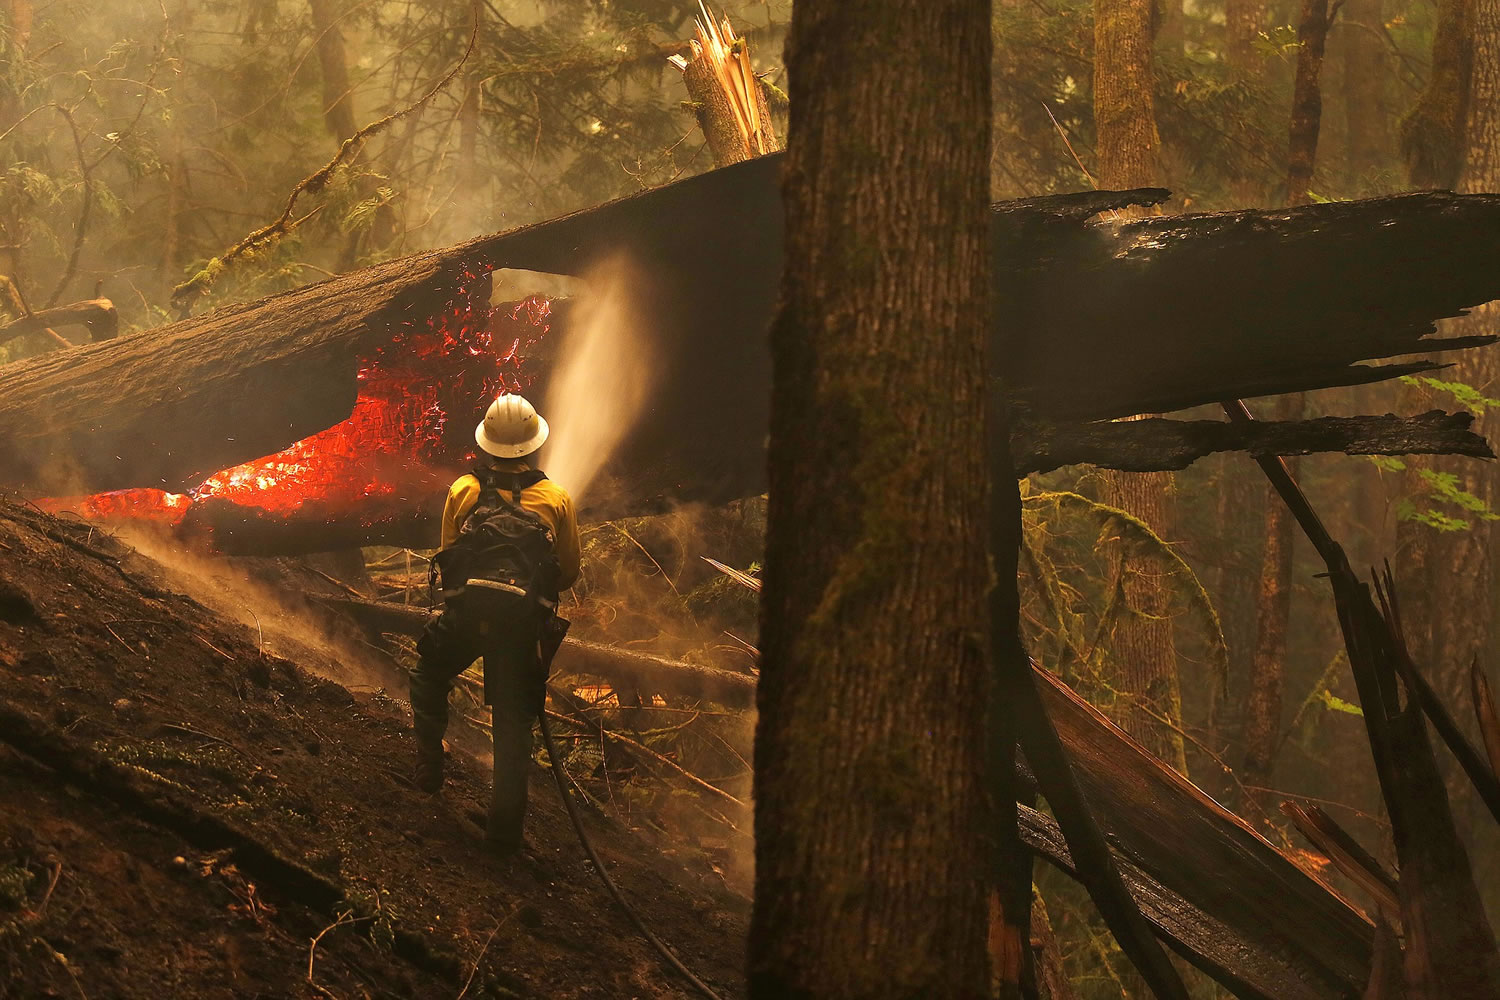 Firefighter Jay Flora sprays a hot spot on a downed tree along the Trail of Cedars across the river from Newhalem, Wash., Wednesday, Aug. 26, 2015. Smoky conditions grounded helicopters and airplanes Wednesday that had been fighting the fires.